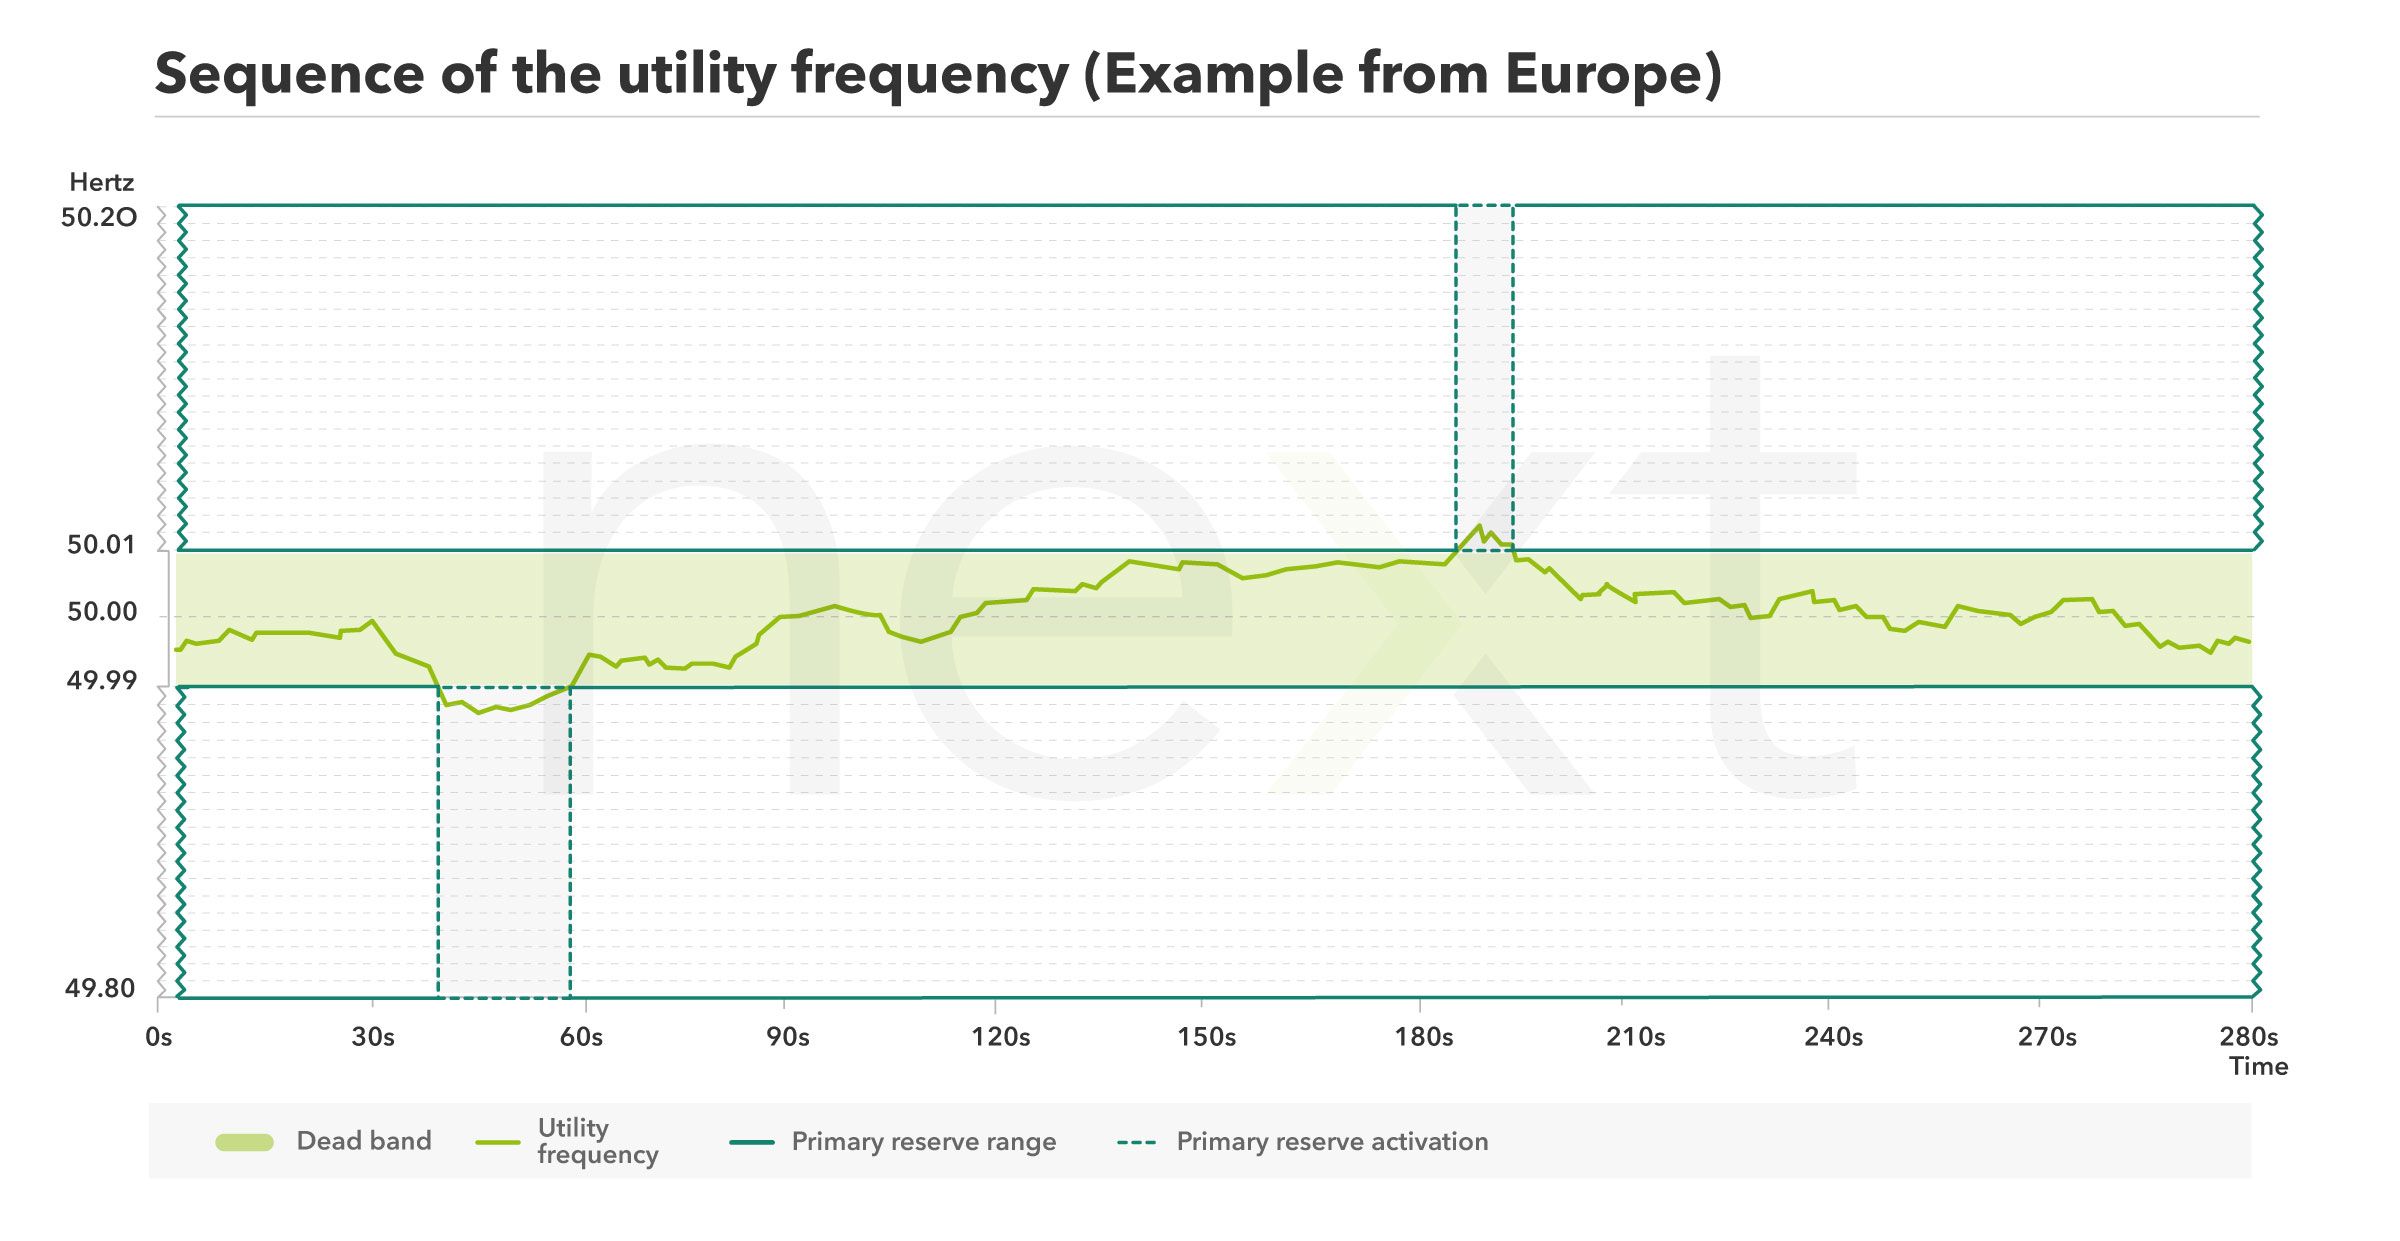 Functioning of the utility frequency in Europe explained.